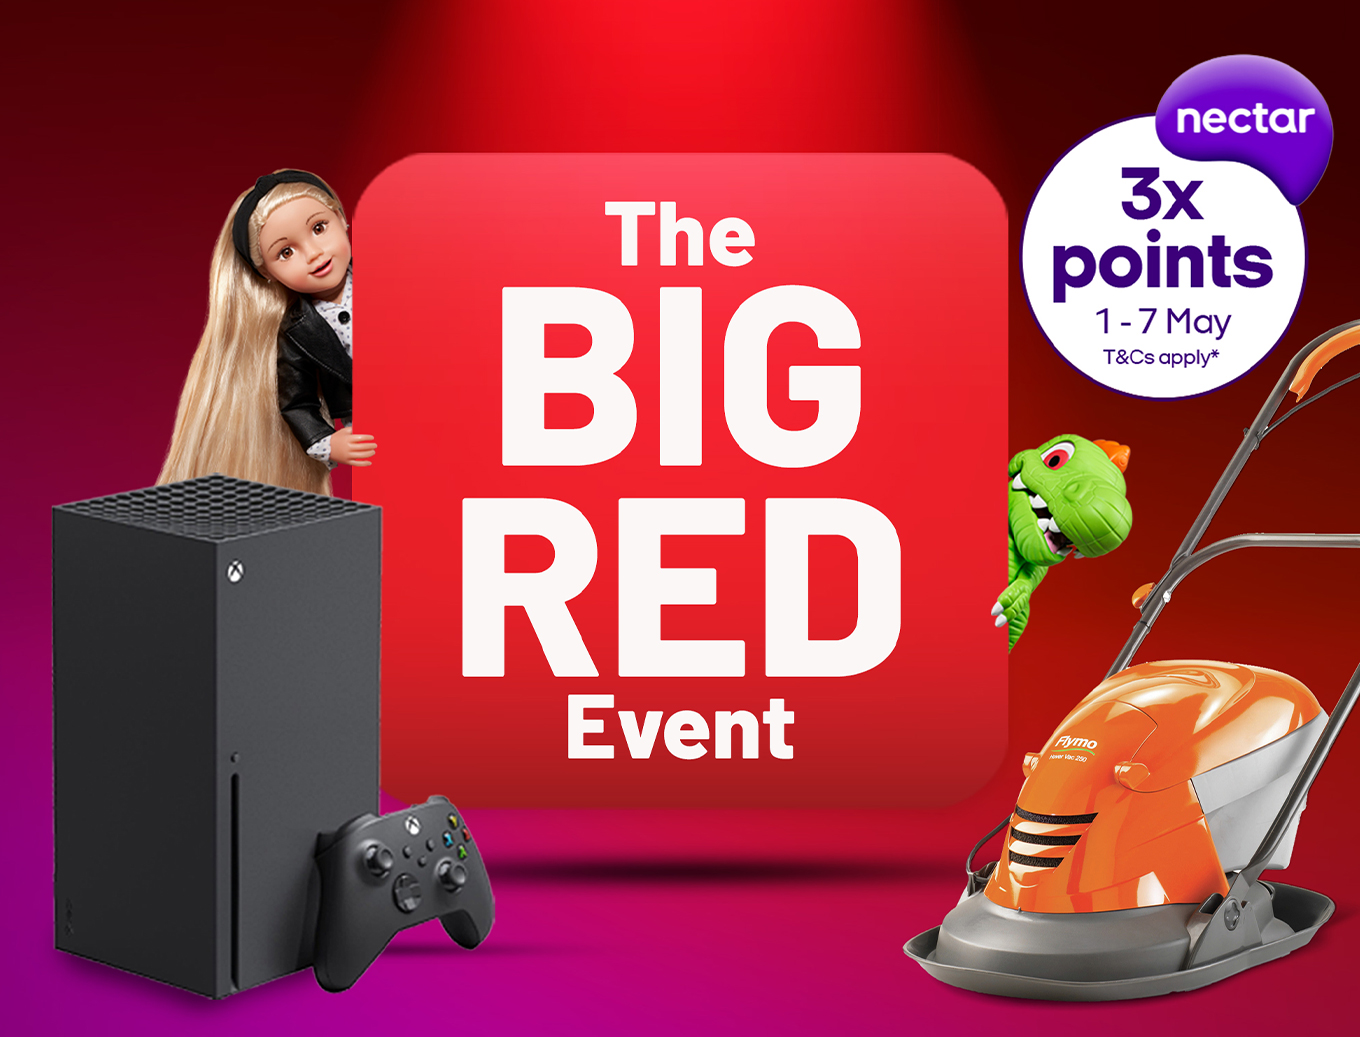 Big red event